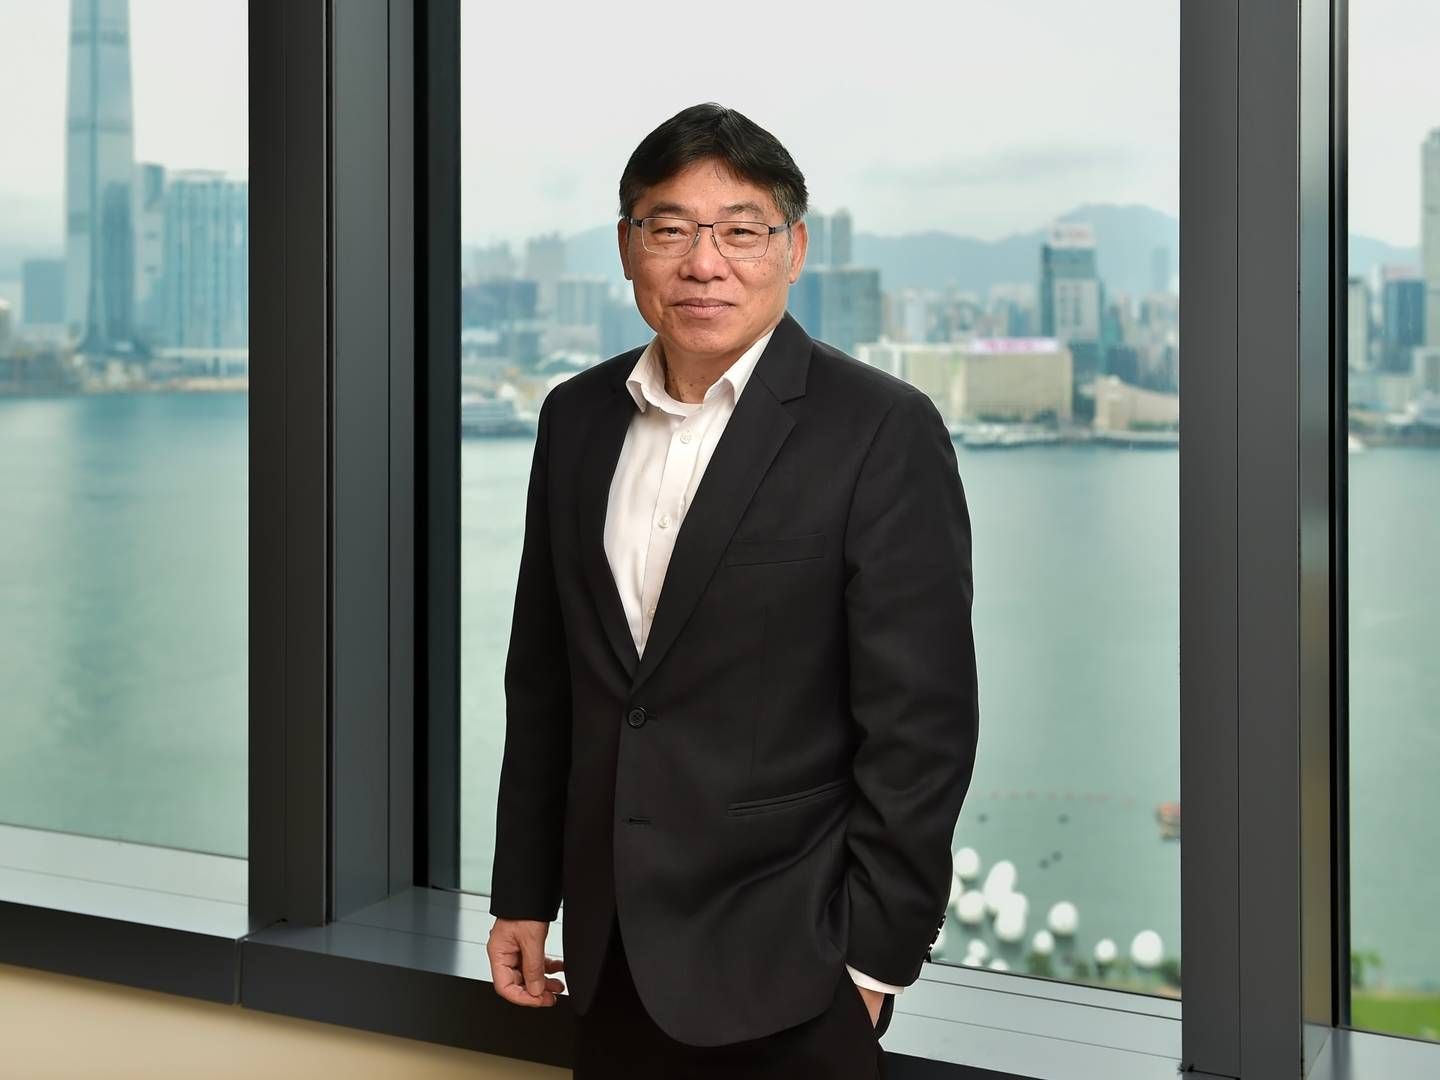 Hong Kong's secretary for transport and logistics, Lam Sai-hung, says the "appropriate body" will approach Maersk to discuss Gemini's network realignment. | Foto: Ali Ghorbani